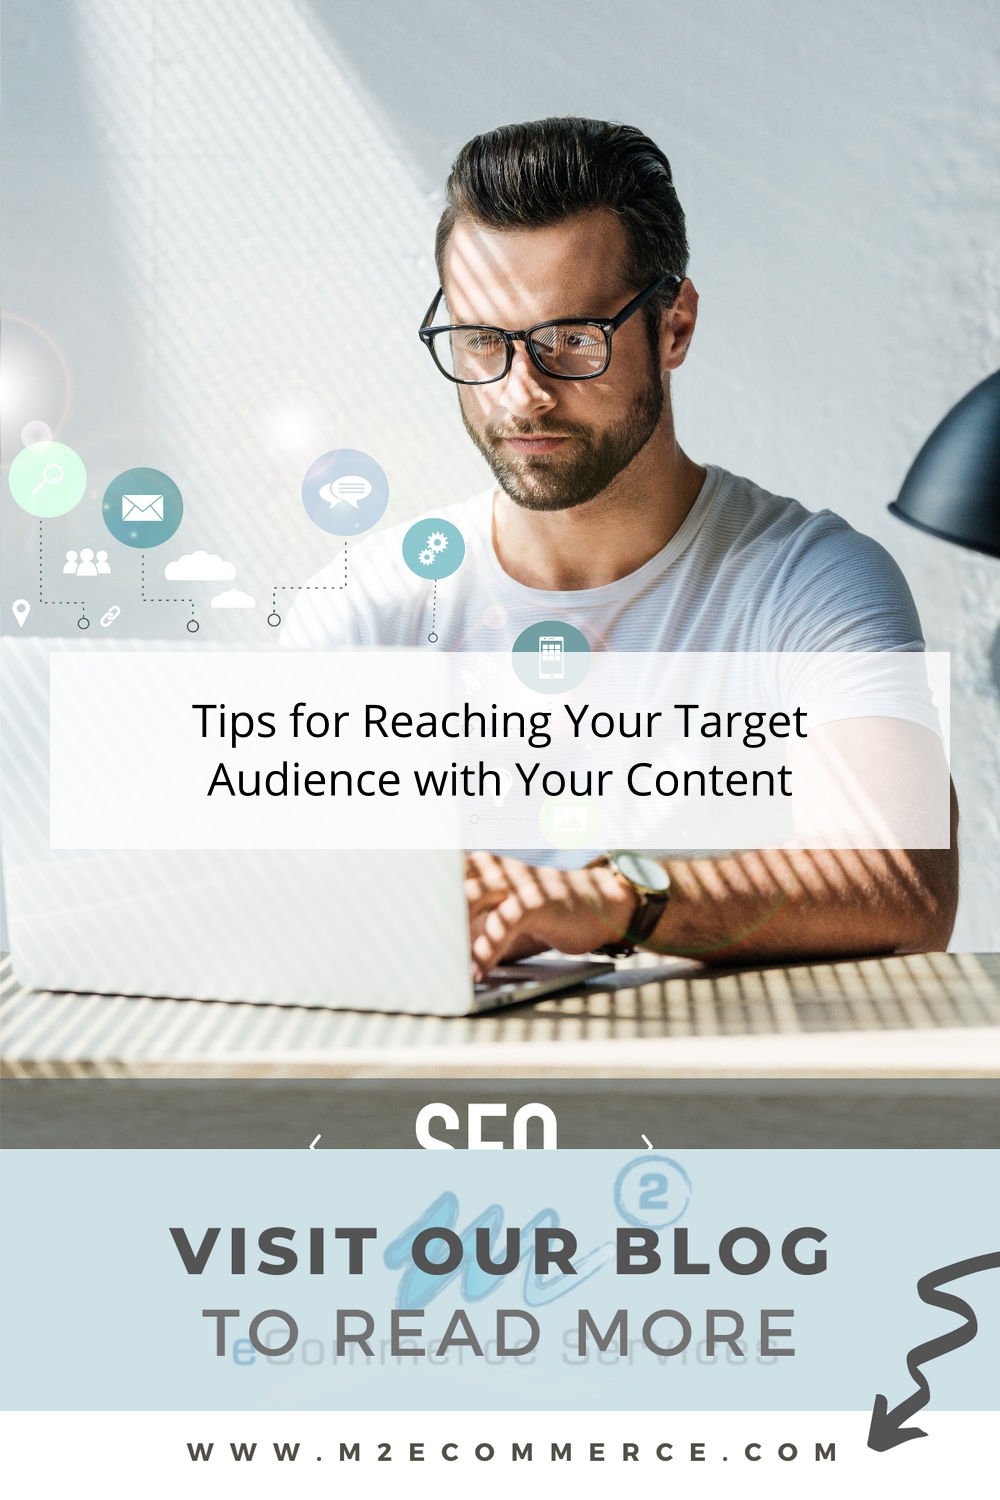 Tips for Reaching Your Target Audience with Your Content